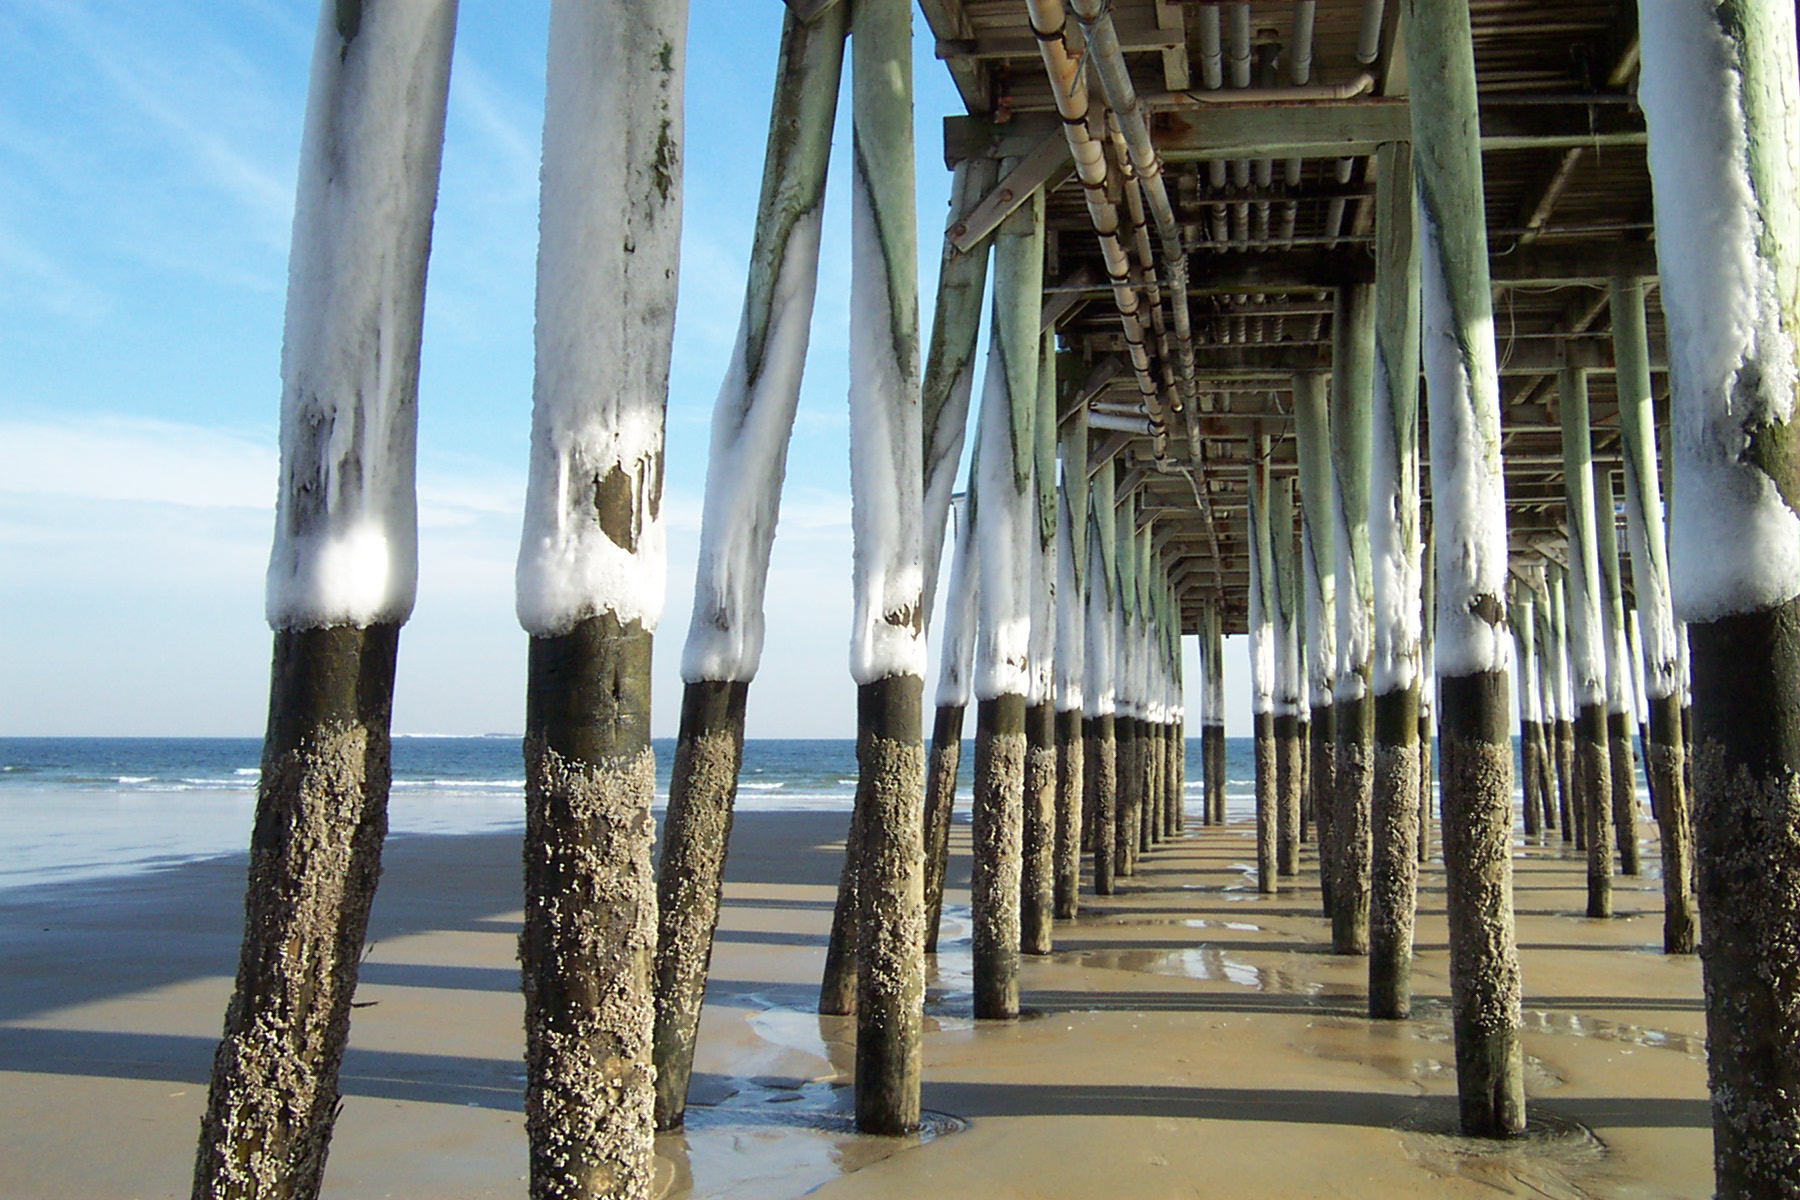 Under The Pier In Winter (user submitted)